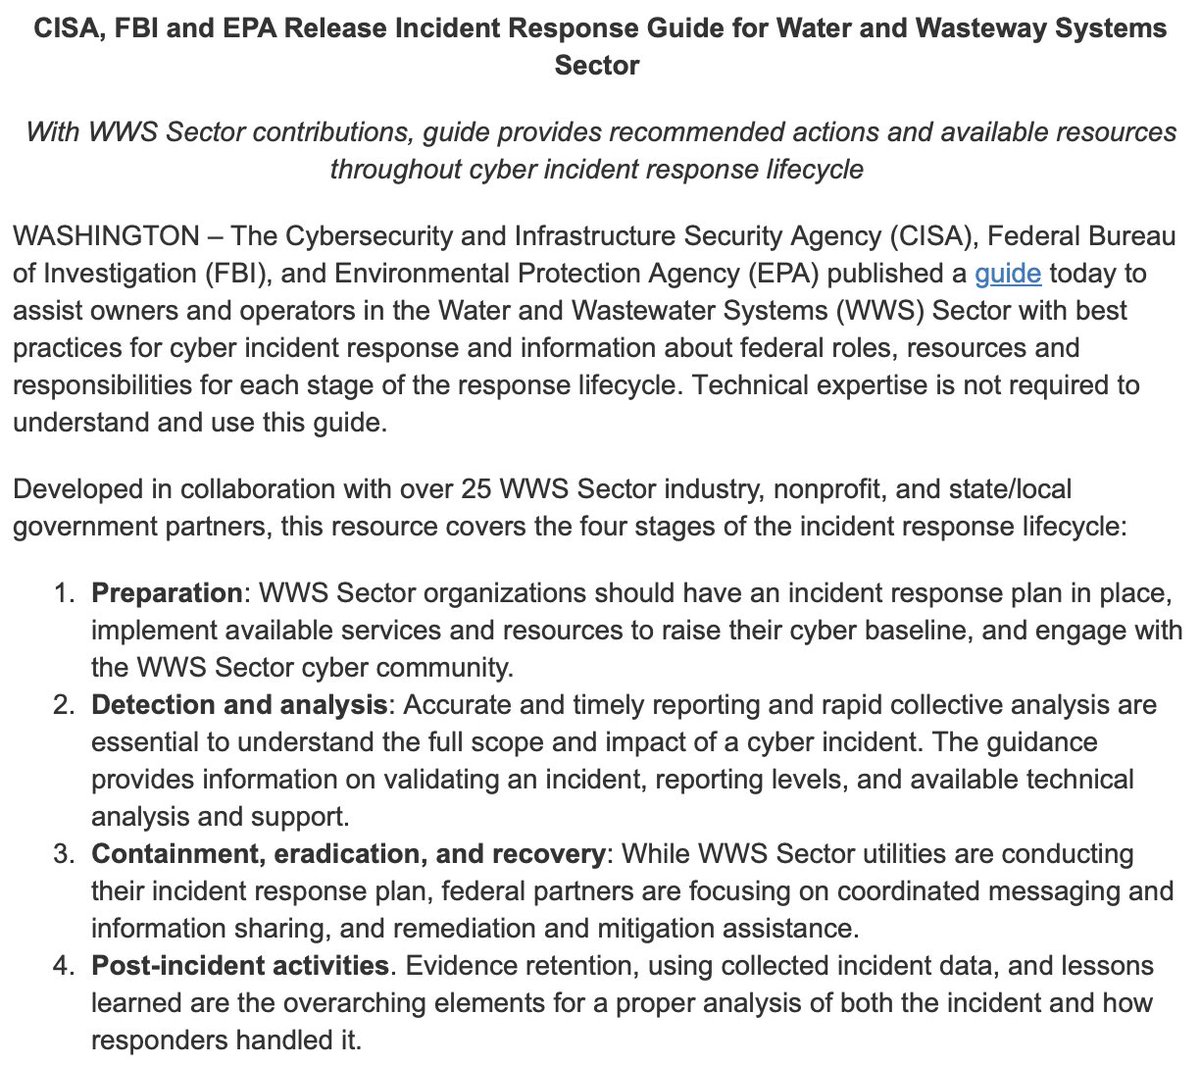 US bracing for more cyberattacks on the country's Water and Wastewater (WWS) Sector @CISAgov @FBI @EPA issues new guide for incident response/improved resilienceCyber threats “a real & urgent risk to safe drinking water & wastewater services per EPA Asst Adm Radhika Fox